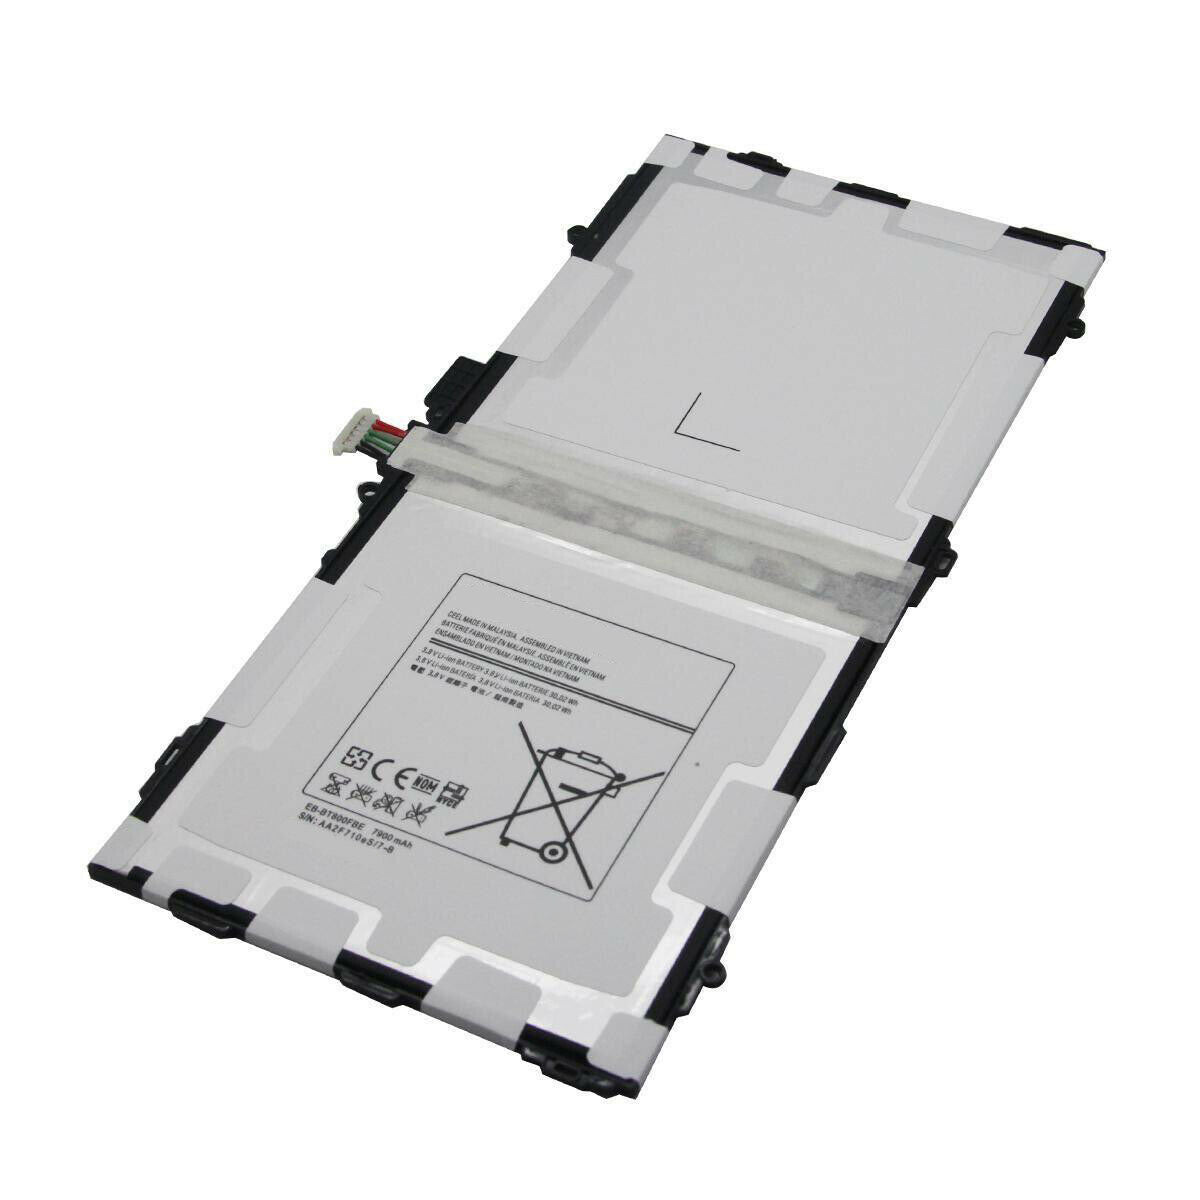 Replacement Battery For Samsung Galaxy Tab S 10.5" - EB-BT800FBE